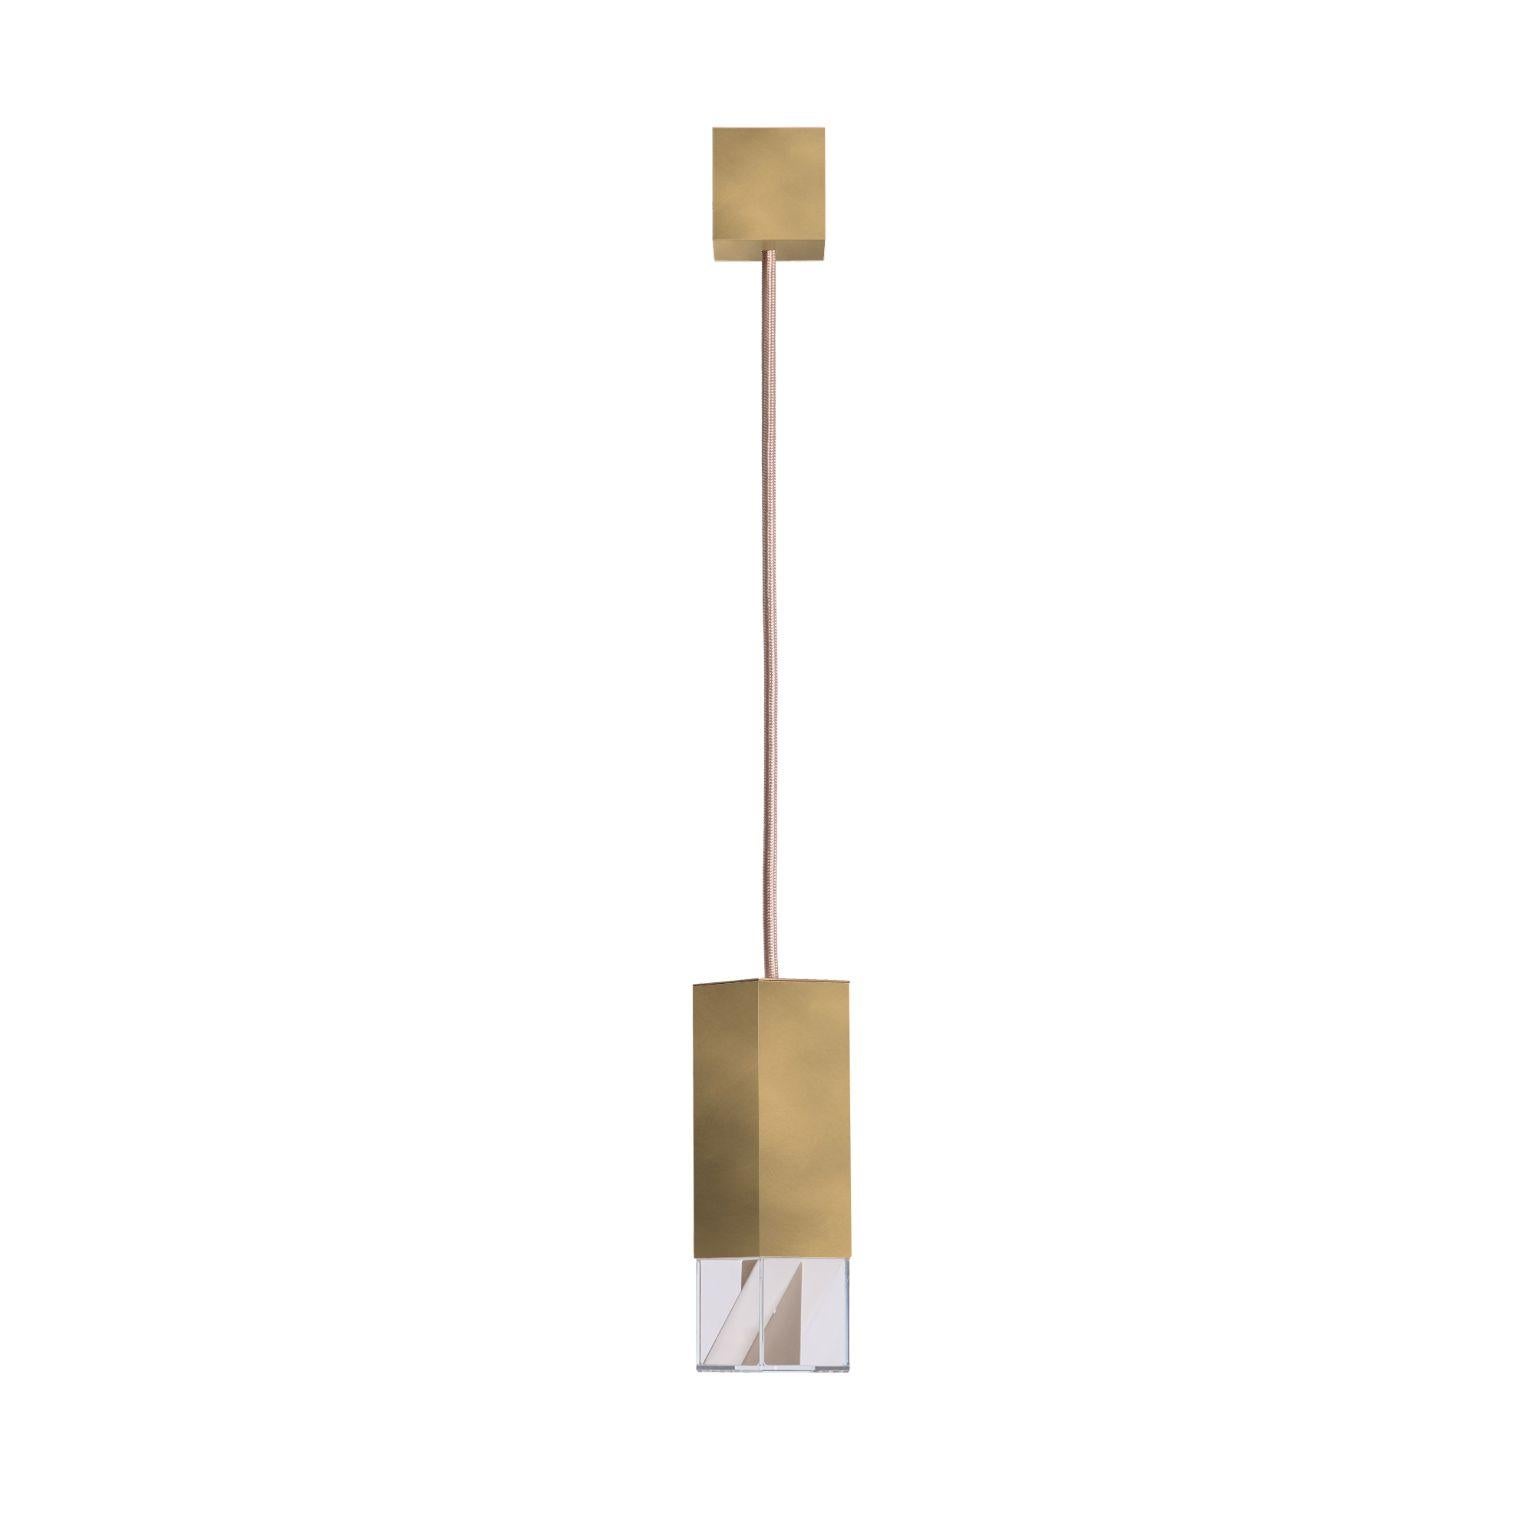 Lamp One brass 02 Revamp Edition by Formaminima
Dimensions: D5 x W5 x H 17 cm.
Materials: Body lamp and ceiling rose: solid burnished satin brass, matt finish Crystal glass diffuser, Limoges porcelain sheets, biscuit-finish.

All our lamps can